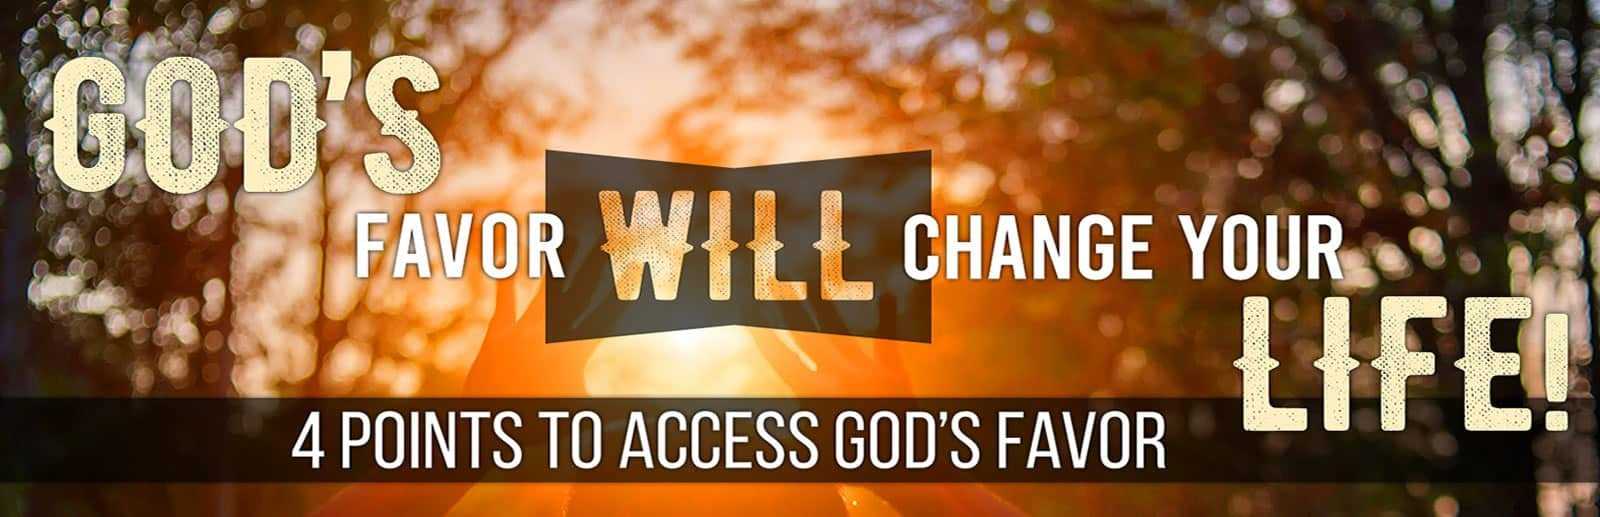 4 points to follow to access God's favour that you already have